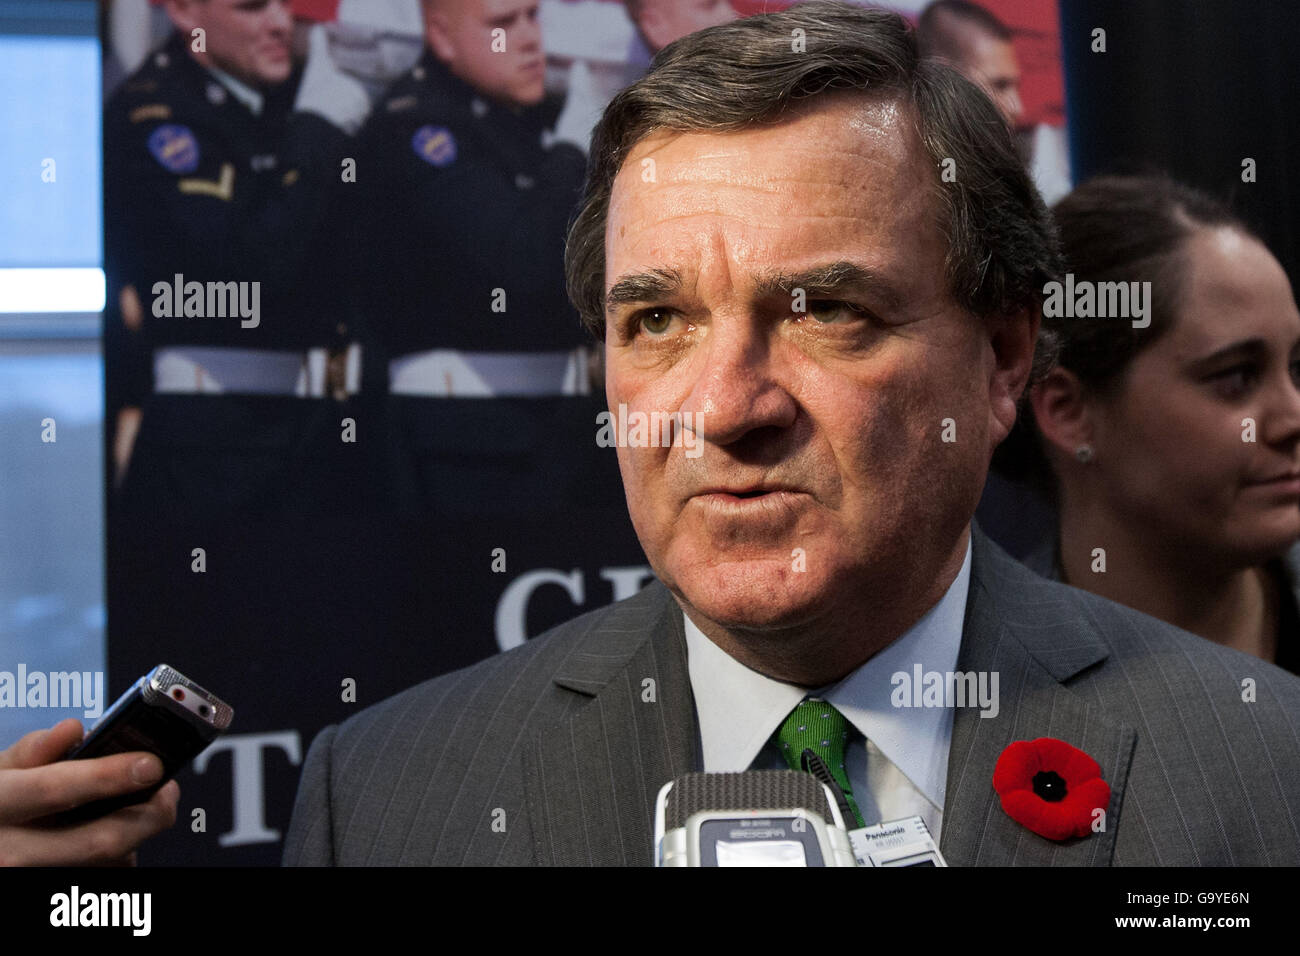 Quinte West, Ontario, Canada. 31st Oct, 2011. Finance Minister Jim Flaherty speaks during a press conference in Quinte West, Ont., on Oct. 31, 2011. © Lars Hagberg/ZUMA Wire/Alamy Live News Stock Photo